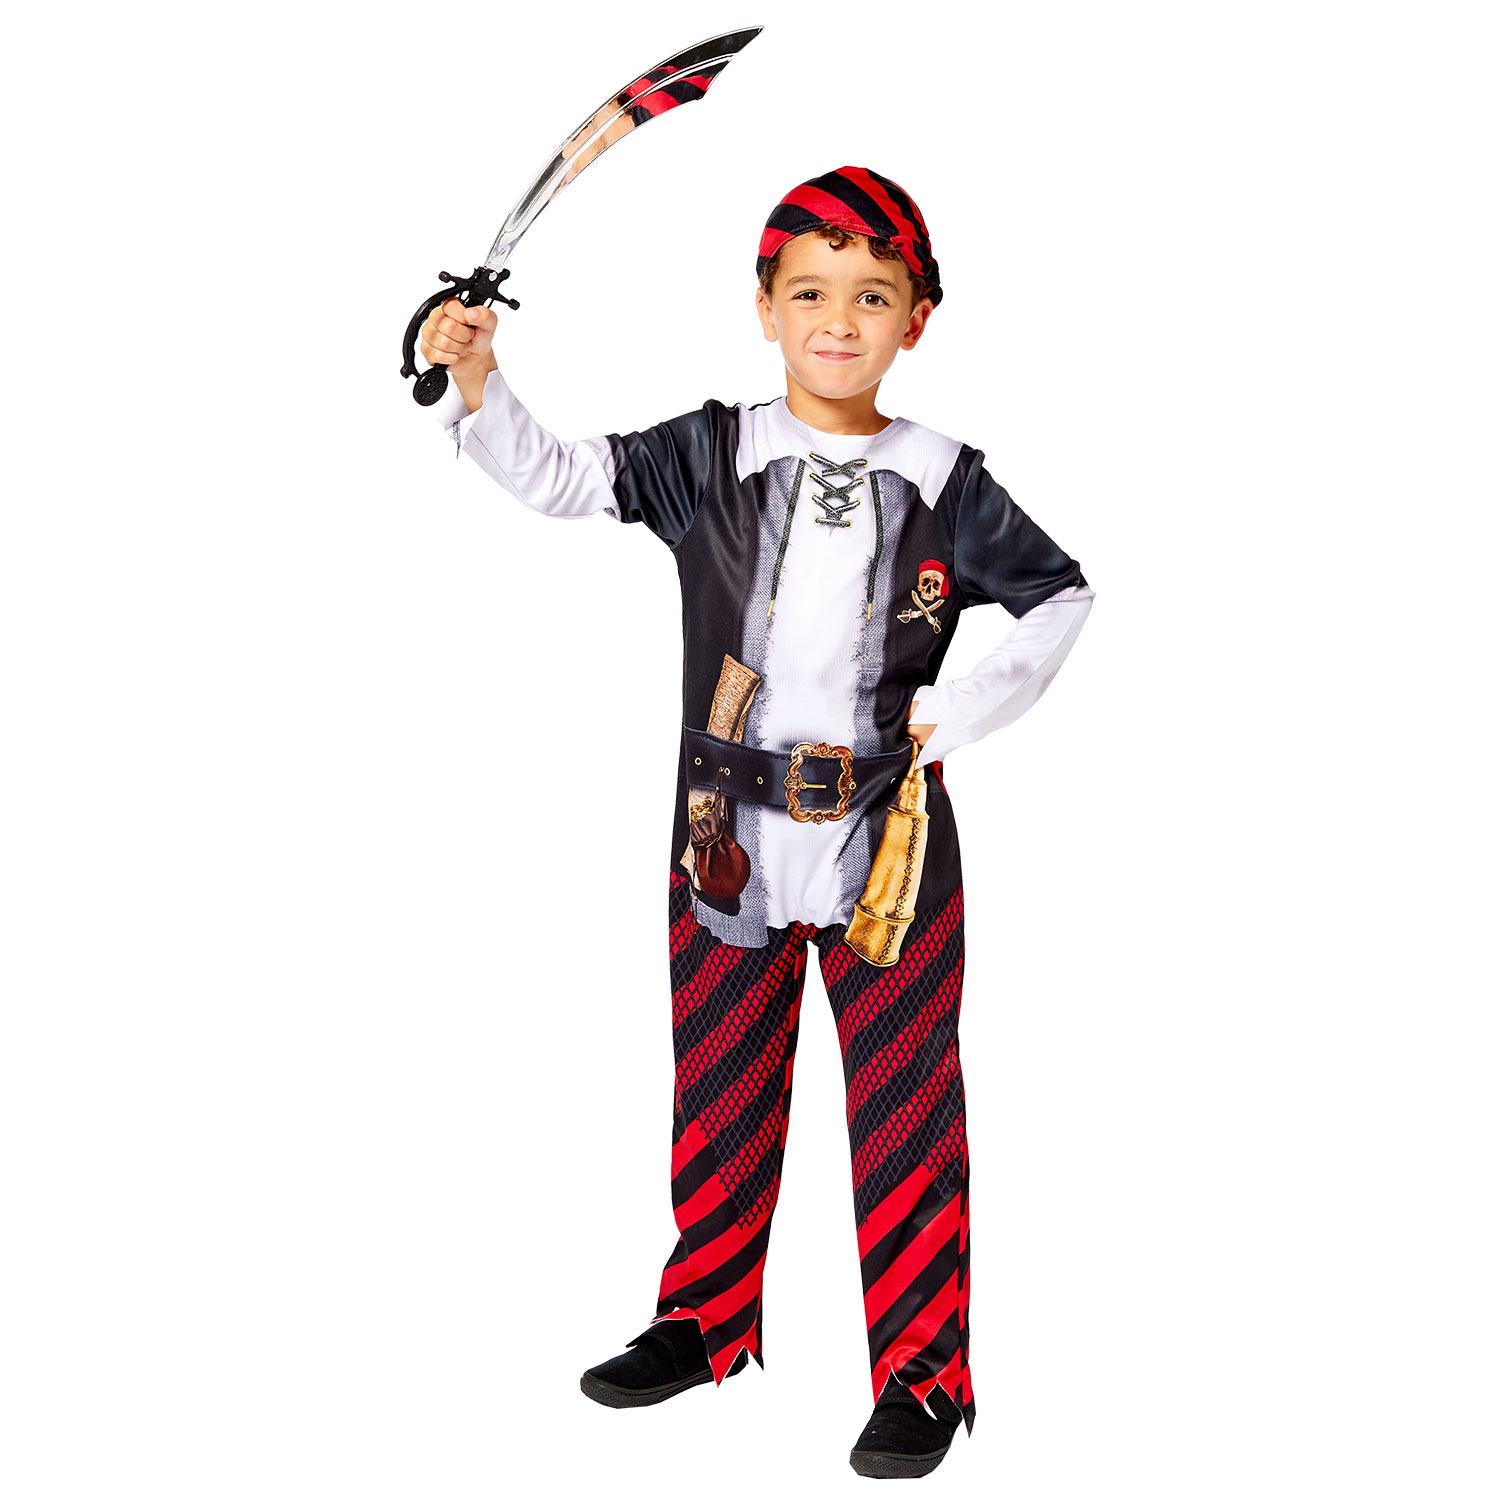 Pirate Boy Sustainable Costume - Age 4-6 Years - 1 PC : Amscan